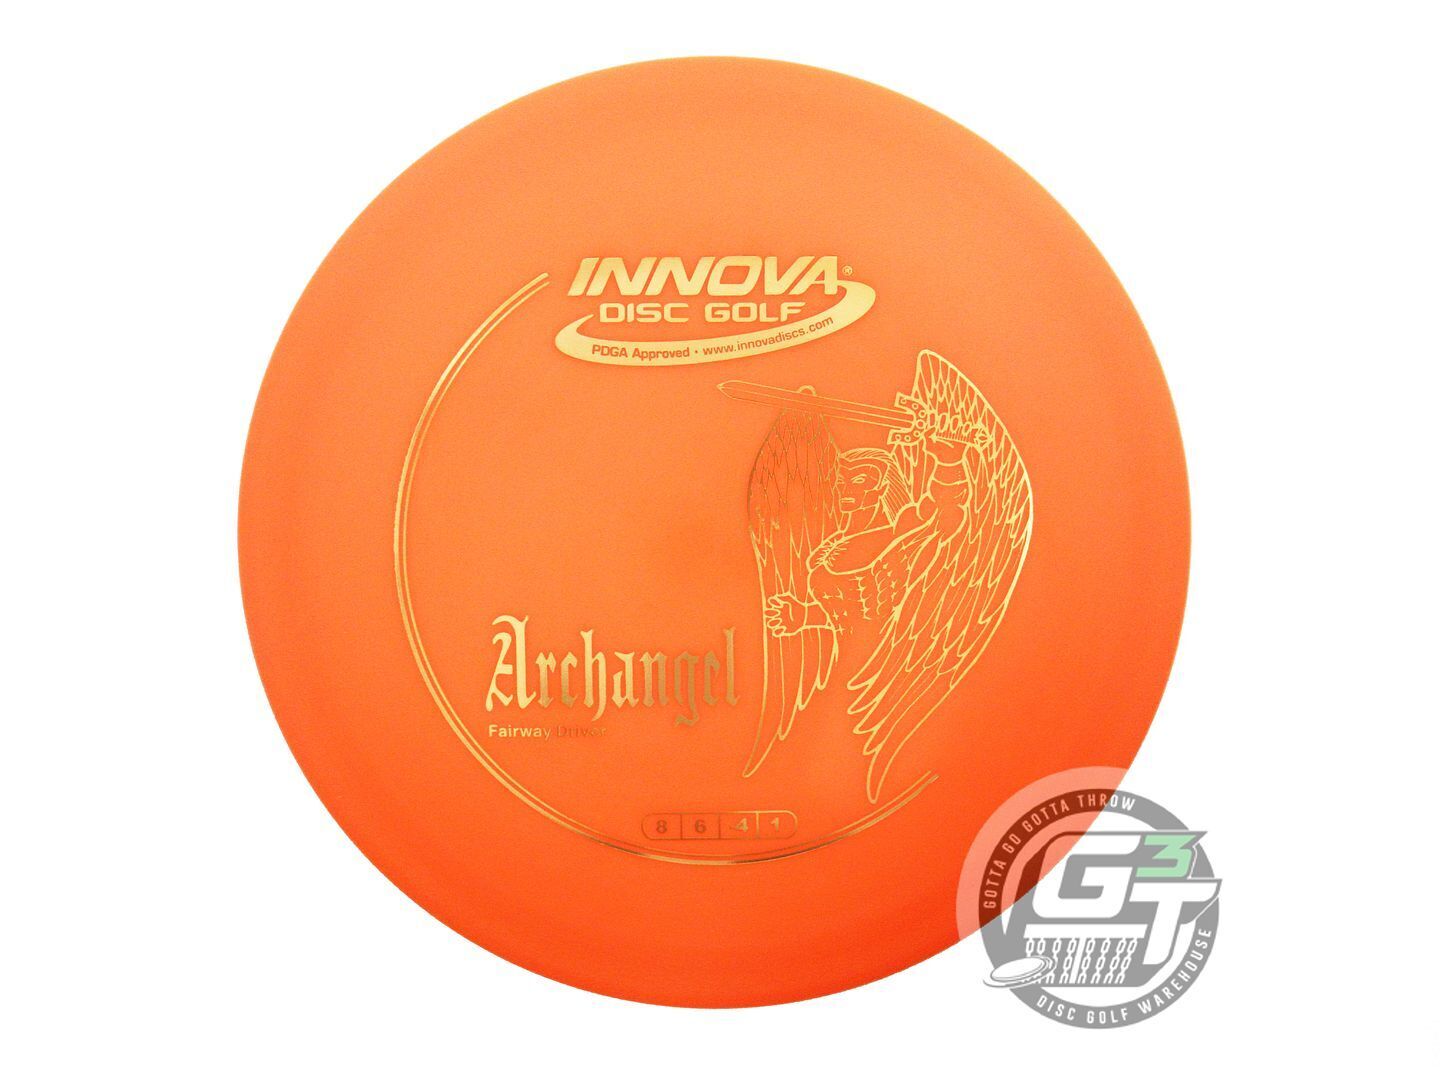 Innova DX Archangel Distance Driver Golf Disc (Individually Listed)